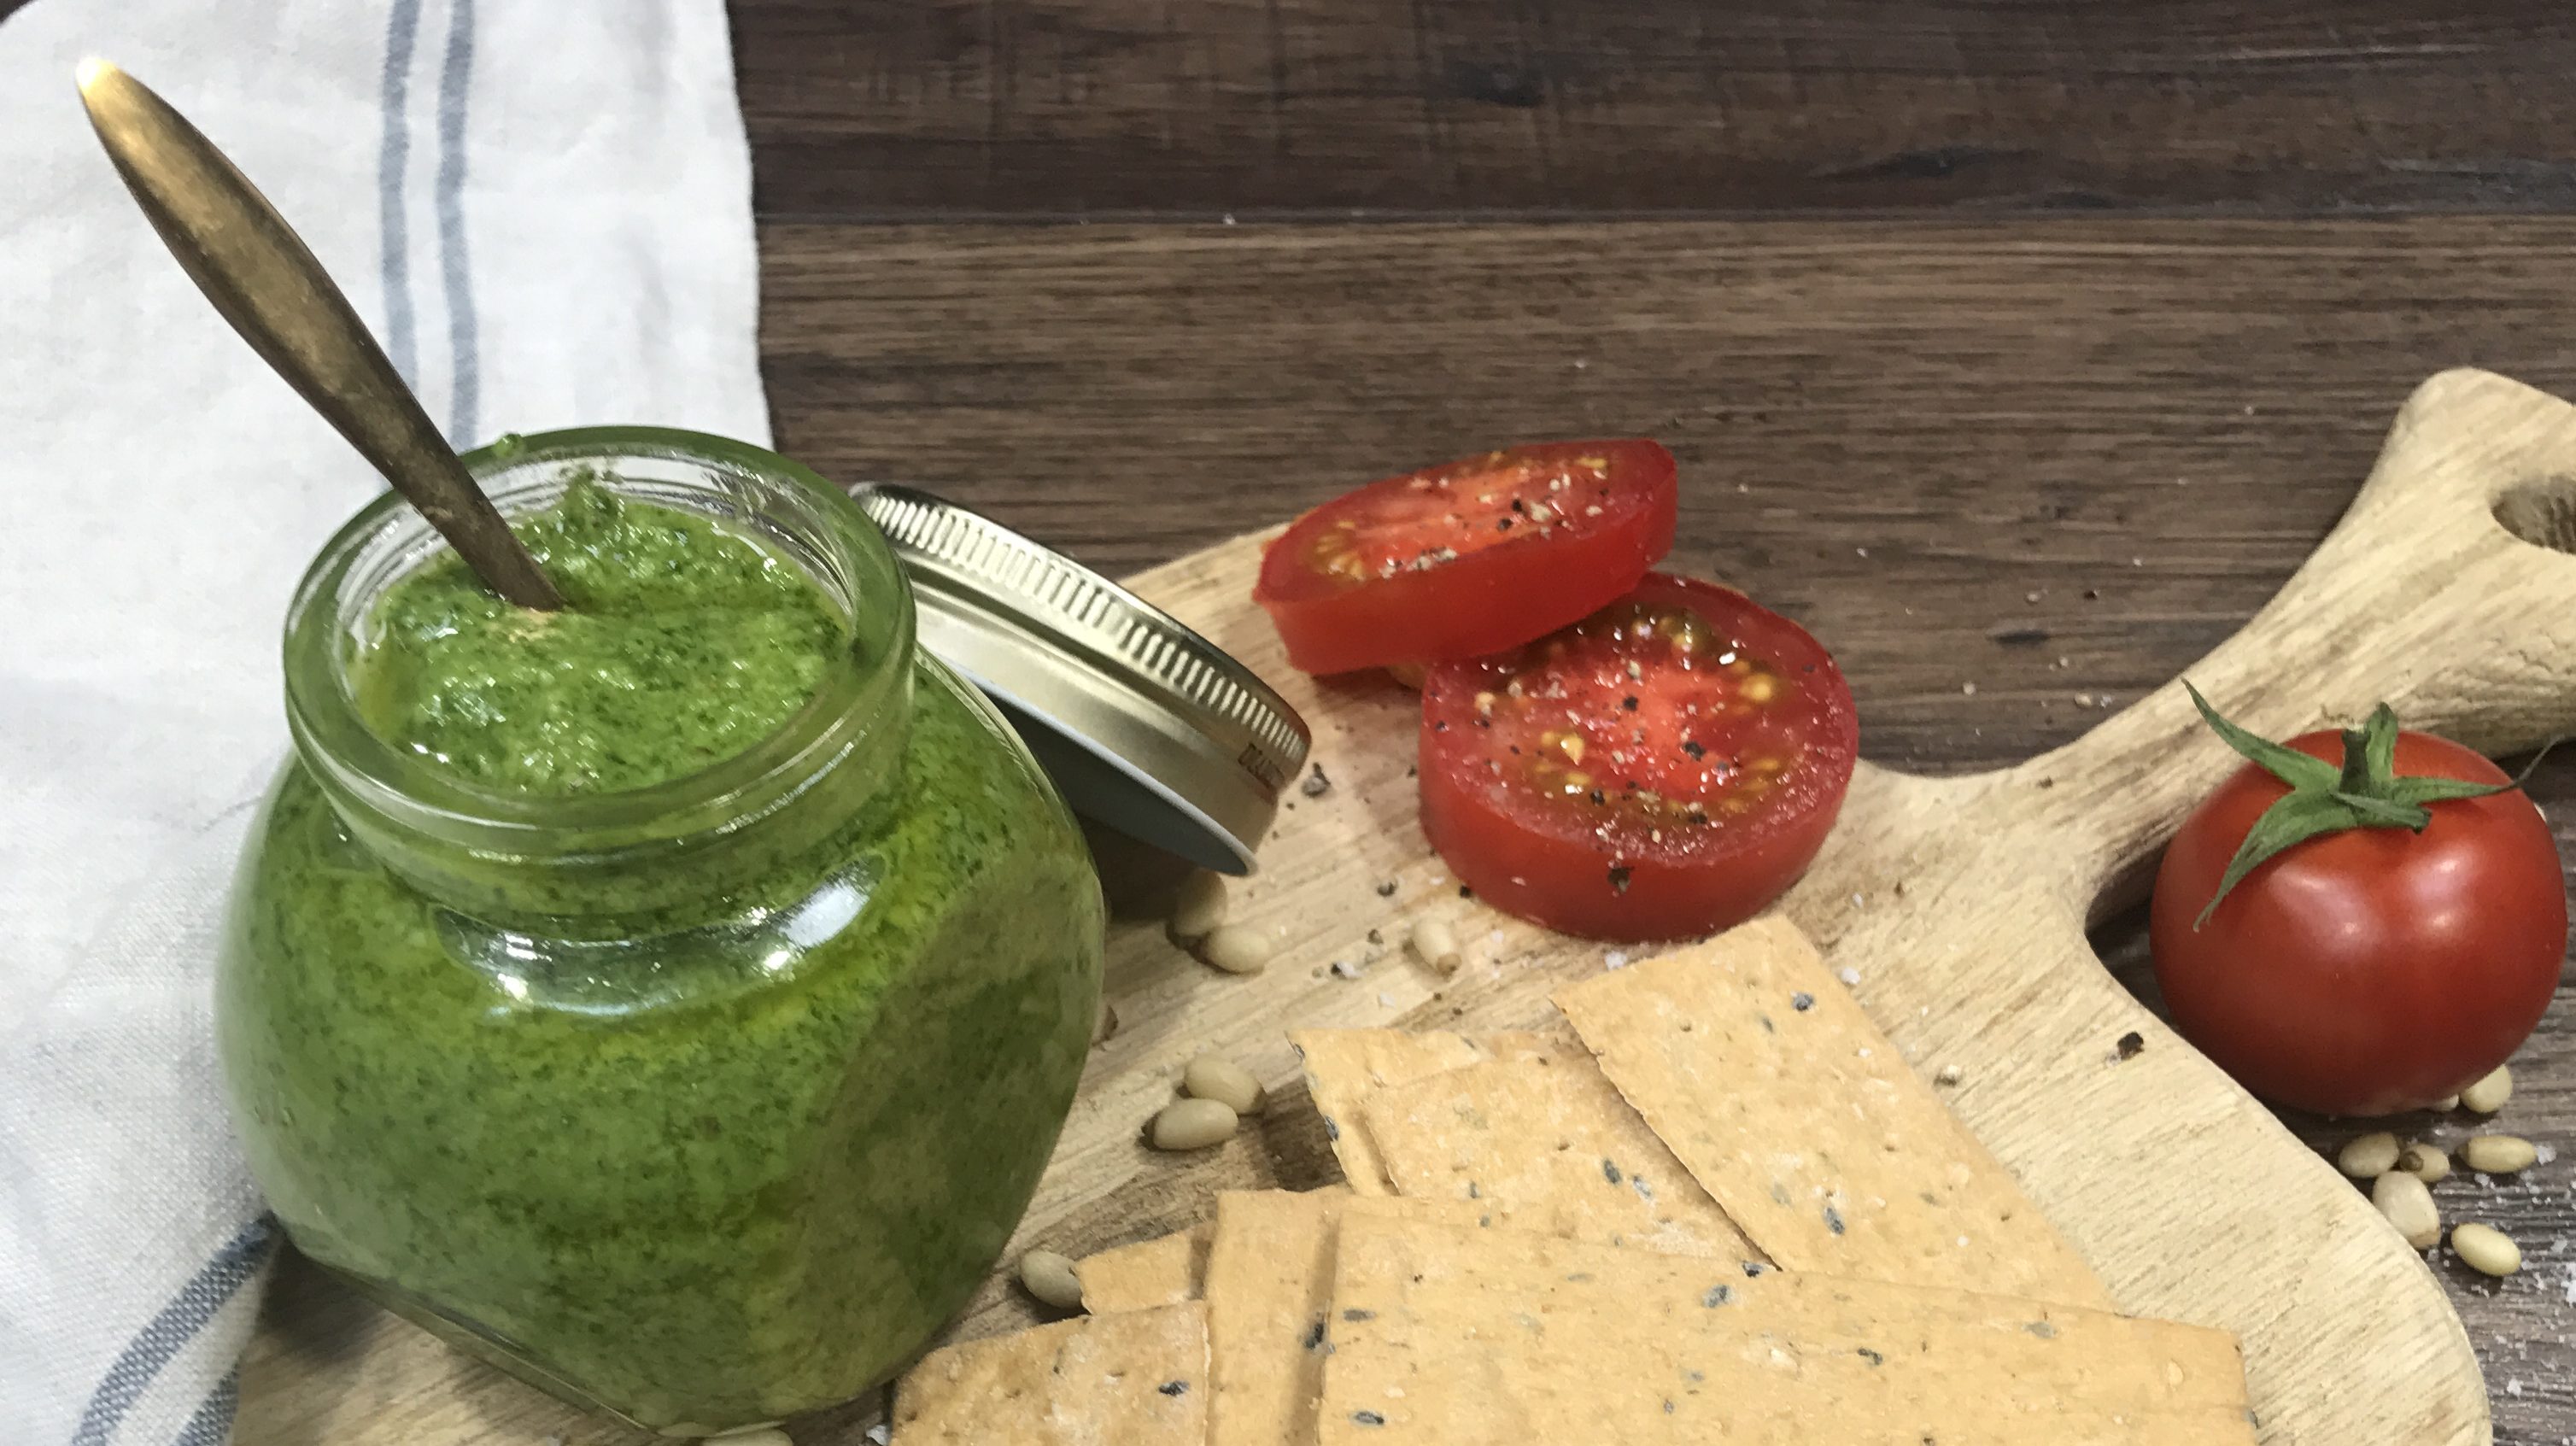 A jar of green pesto, crackers and tomatoes on wooden board.